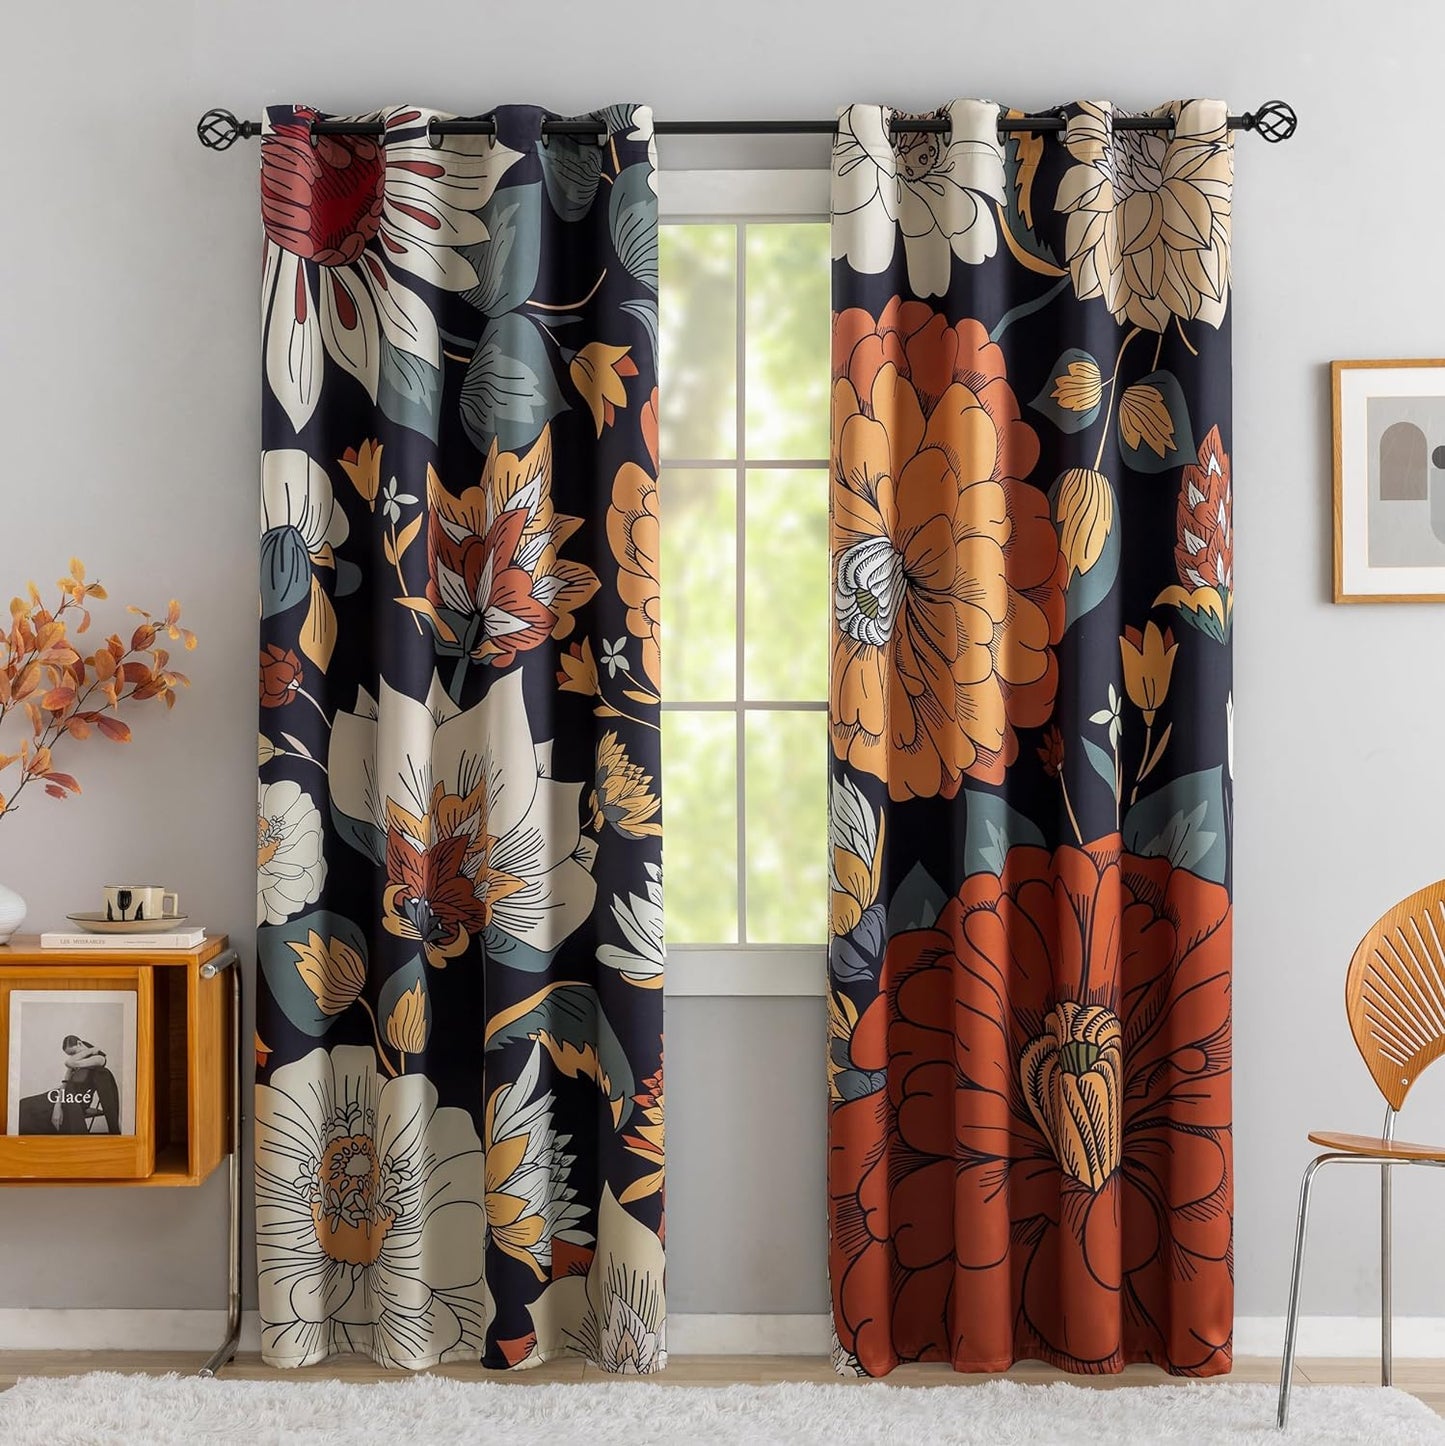 Boho Floral 100% Blackout Curtains for Living Room 96 Inch Long 2 Panels Mid Century Botanical Black Out Curtains for Bedroom Grommet Thermal Insulated Room Darkening Window Drapes,52Wx96L  Tyrot Boho Floral 52W X 84L Inch X 2 Panels 